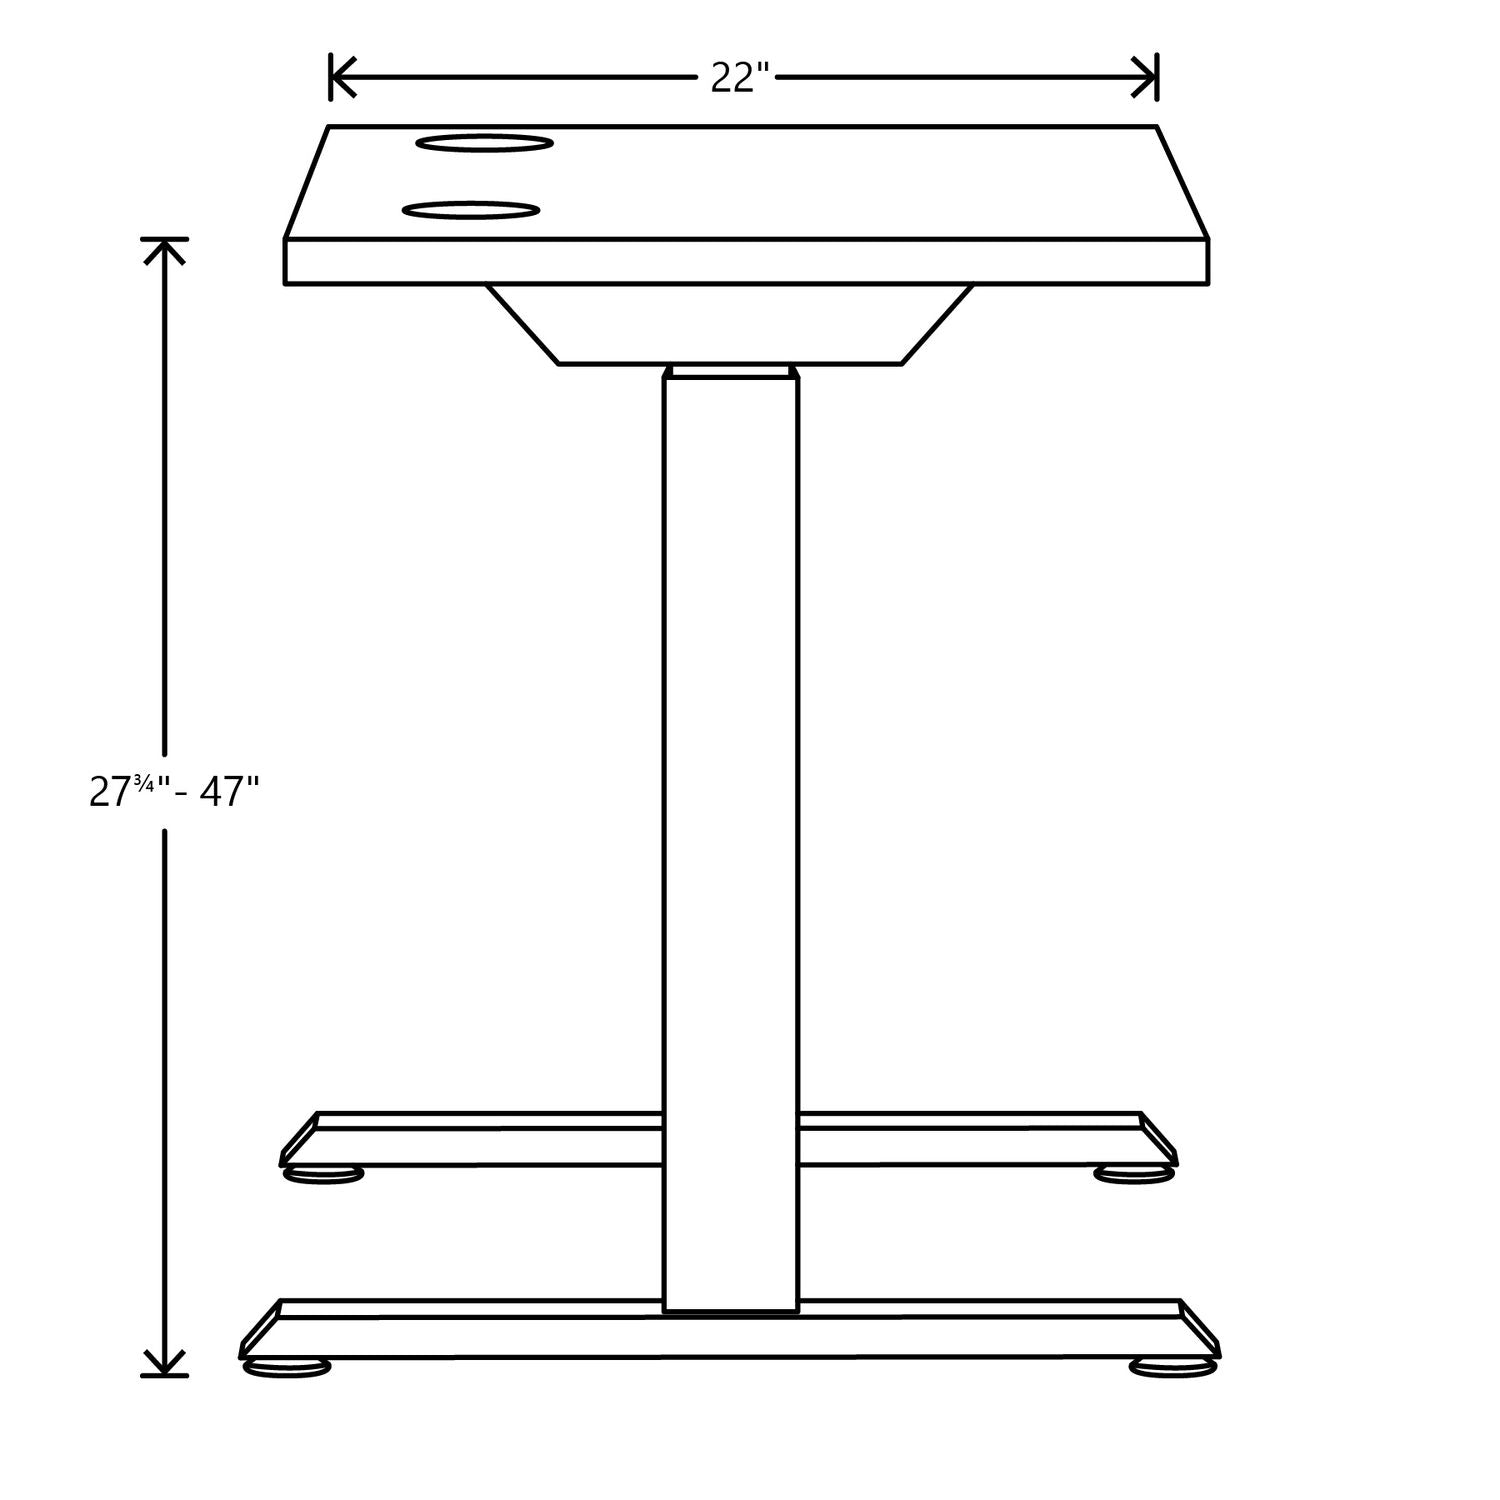 coordinate-height-adjustable-desk-bundle-2-stage-46-x-22-x-2775-to-47-silver-mesh\\black-ships-in-7-10-business-days_honhat2smbk2246 - 6